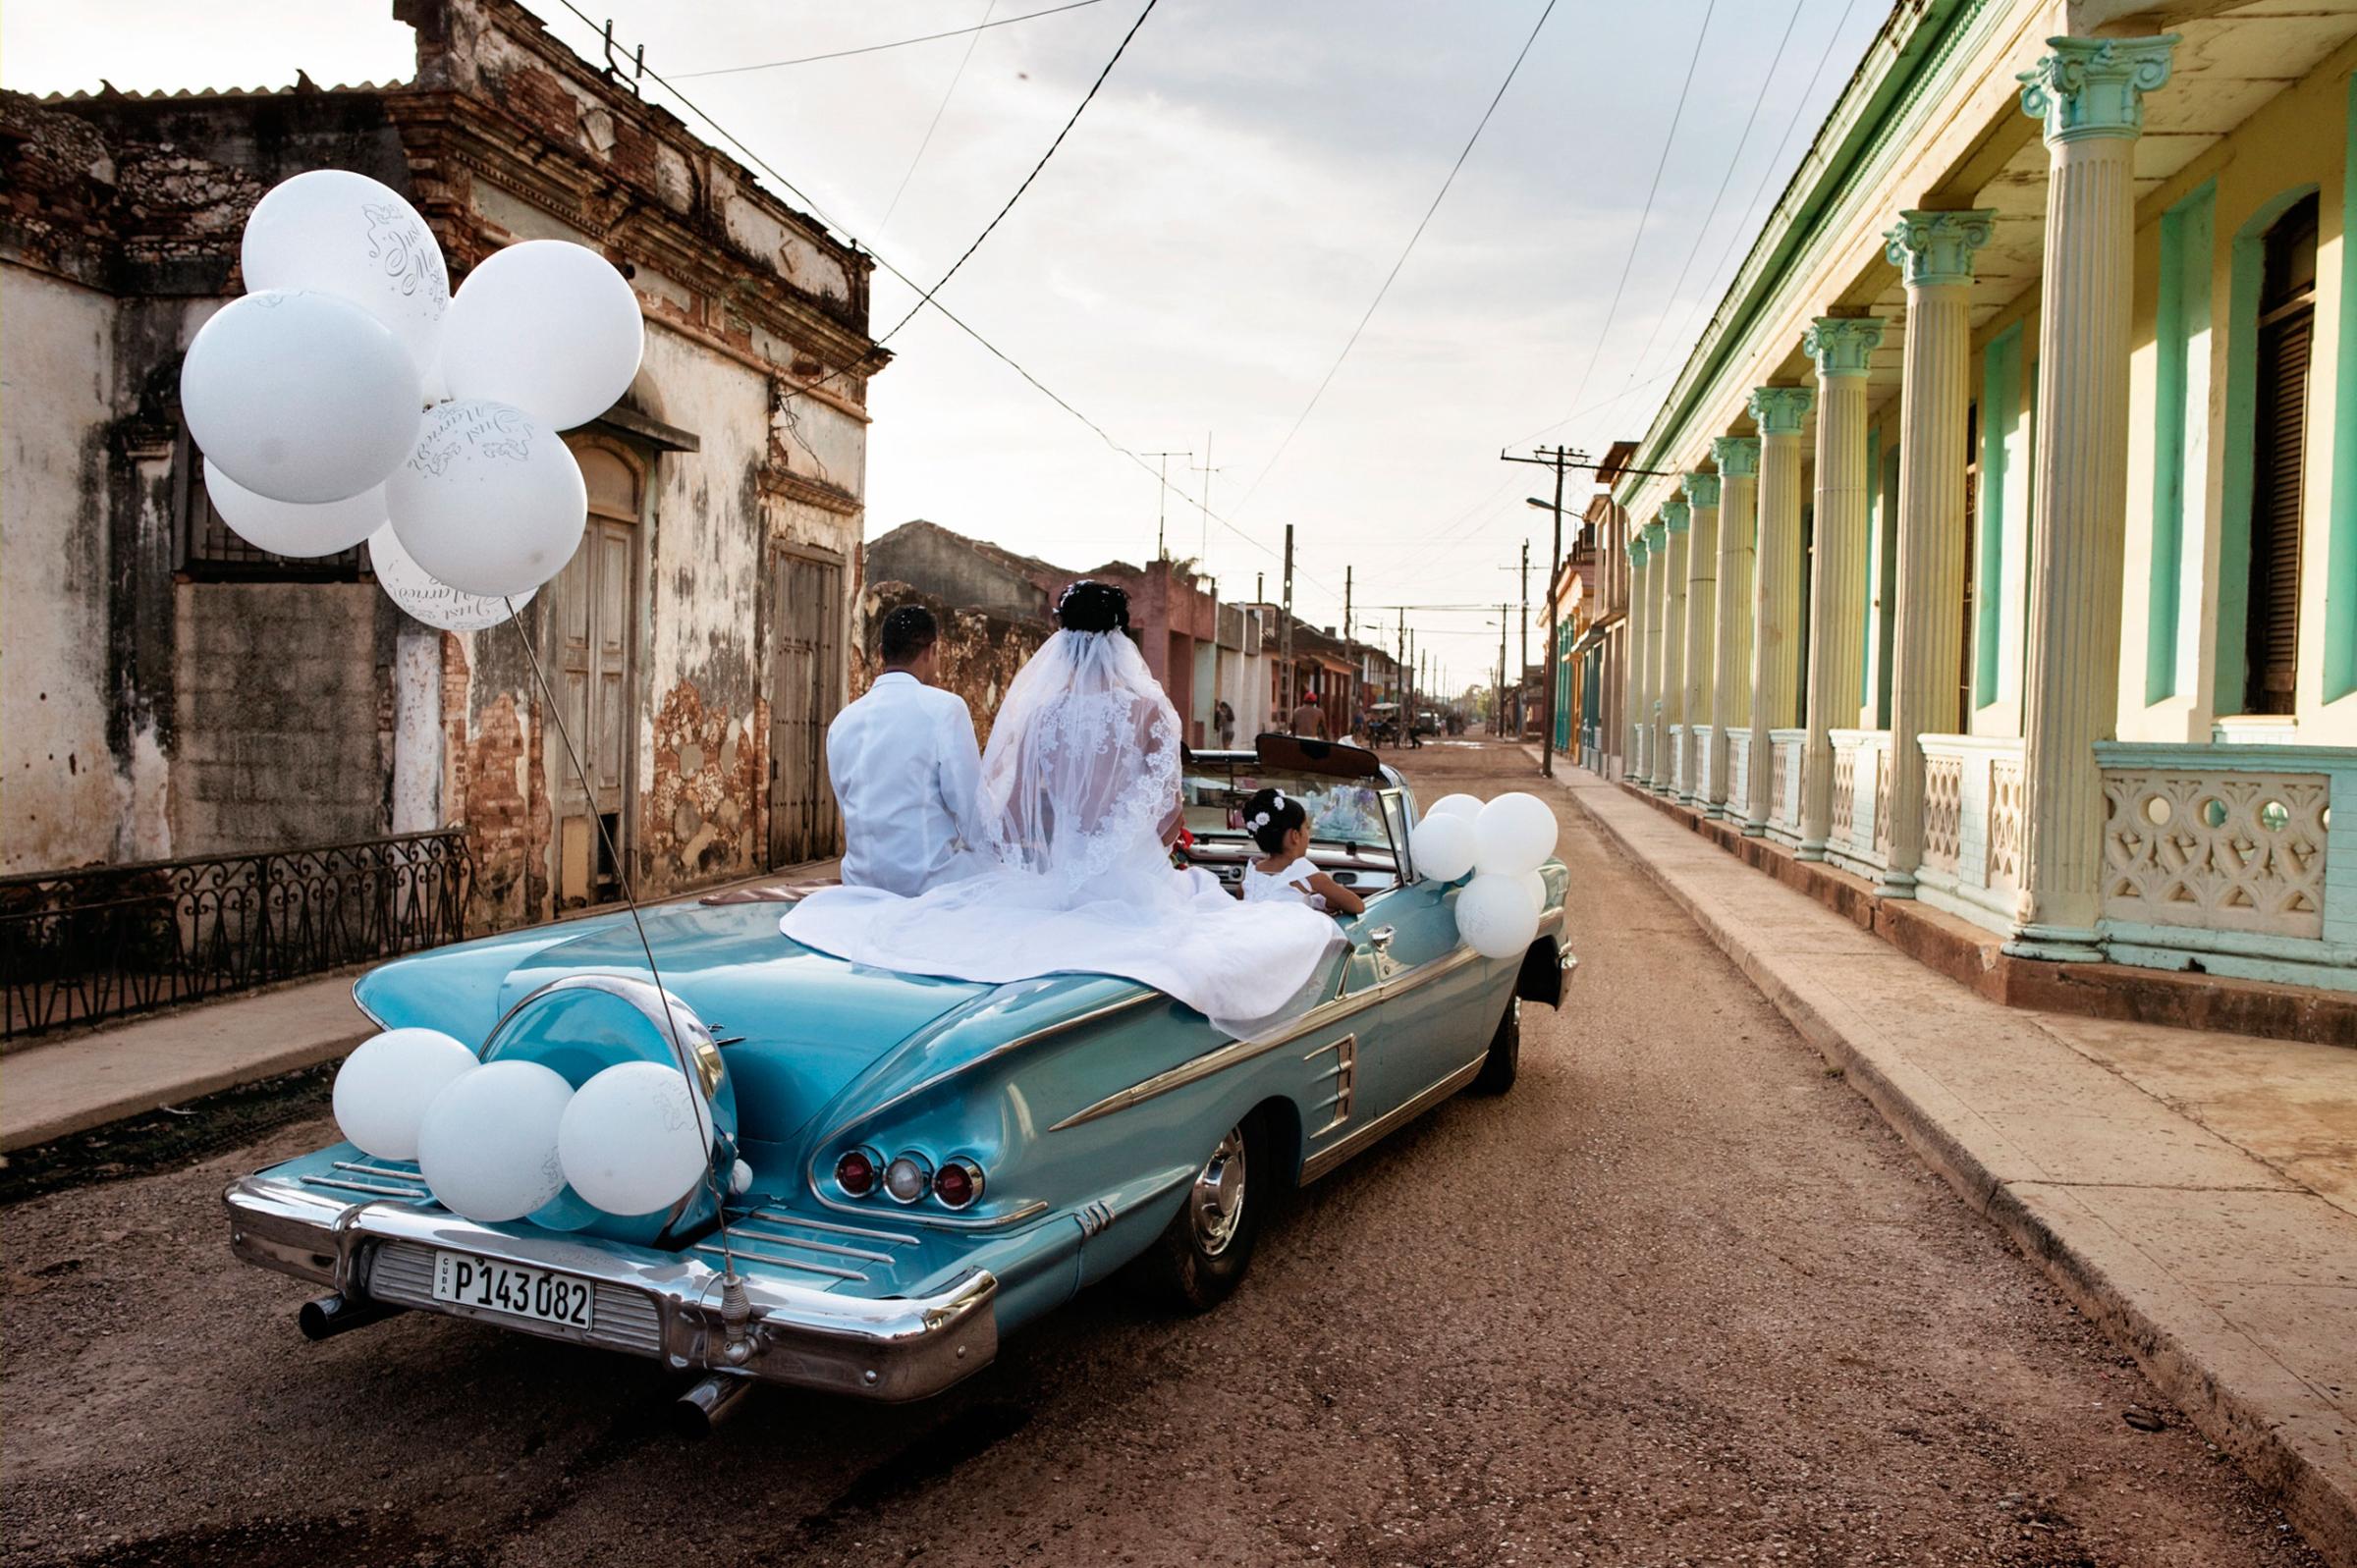 Newlyweds ride in a vintage American car through the streets of Guira de Melena. In this prosperous area outside Havana, weddings can cost as much as 20.000 dollars. Many residents here have relatives who have emigrated to the United States, Jan. 2015. Yuri Kozyrev—NOOR for TIME